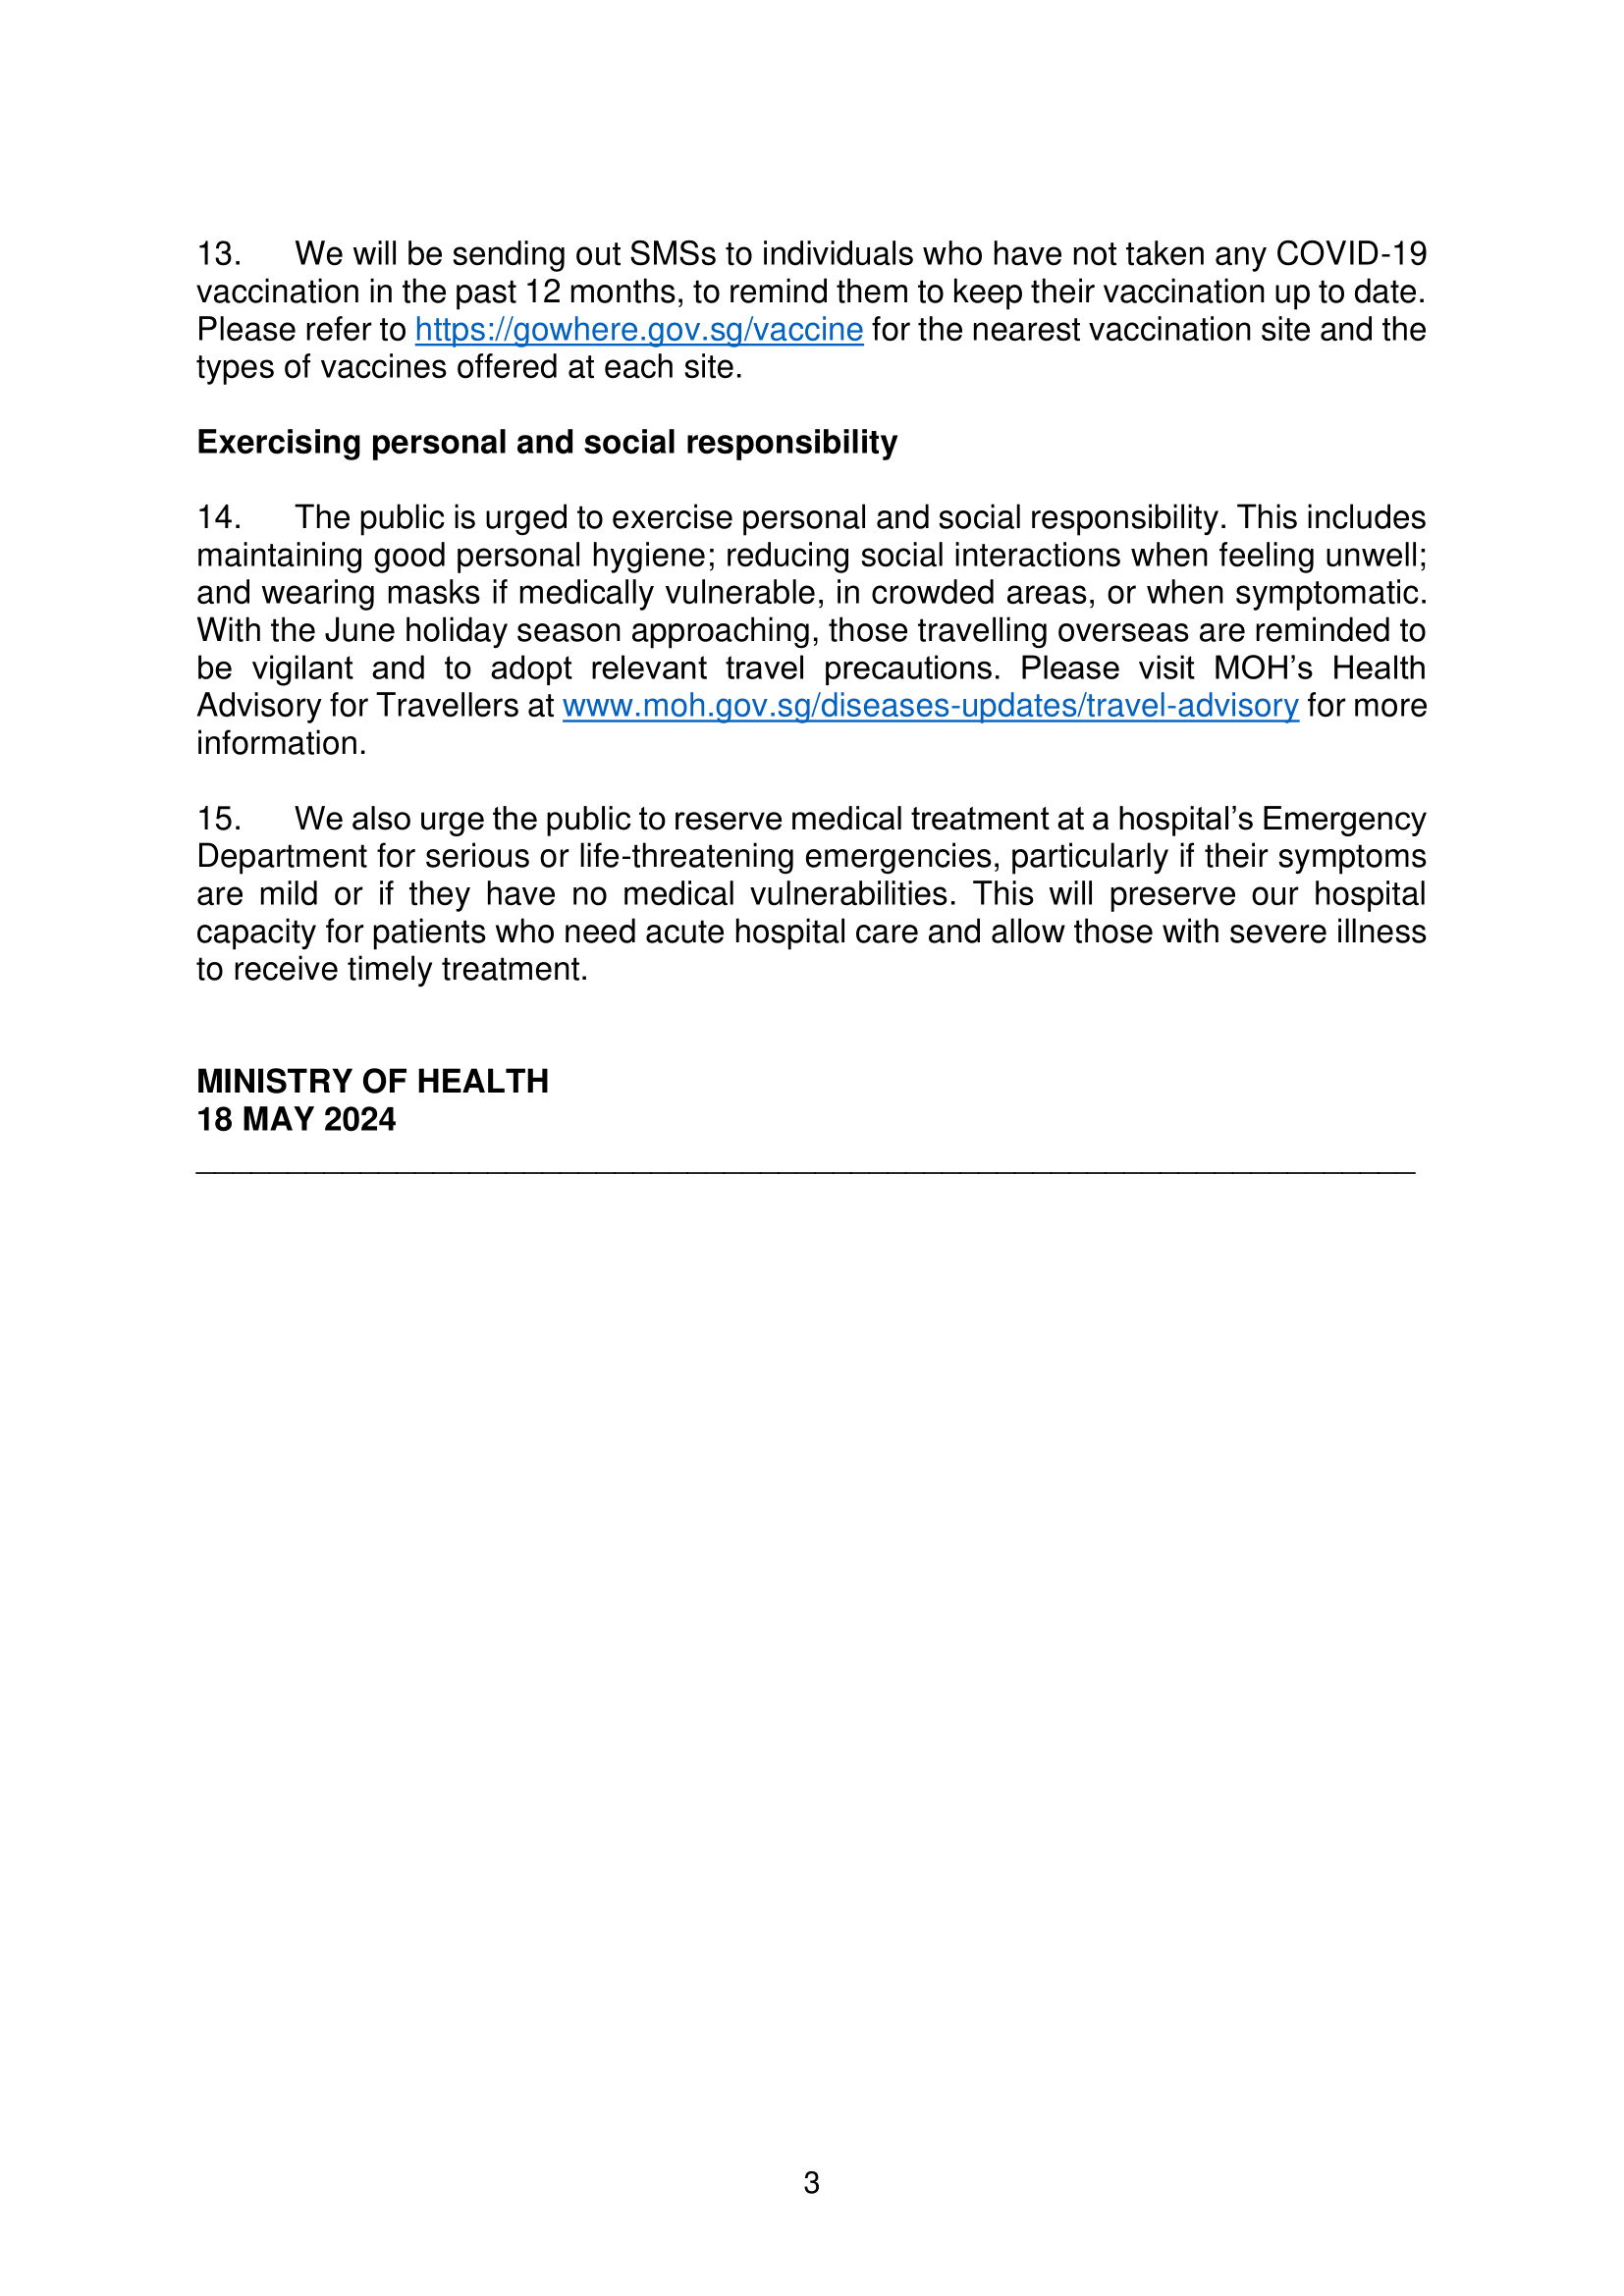 [MOH Connected] Press Release - Update on Local COVID-19 Situation May 2024 v2-3.png